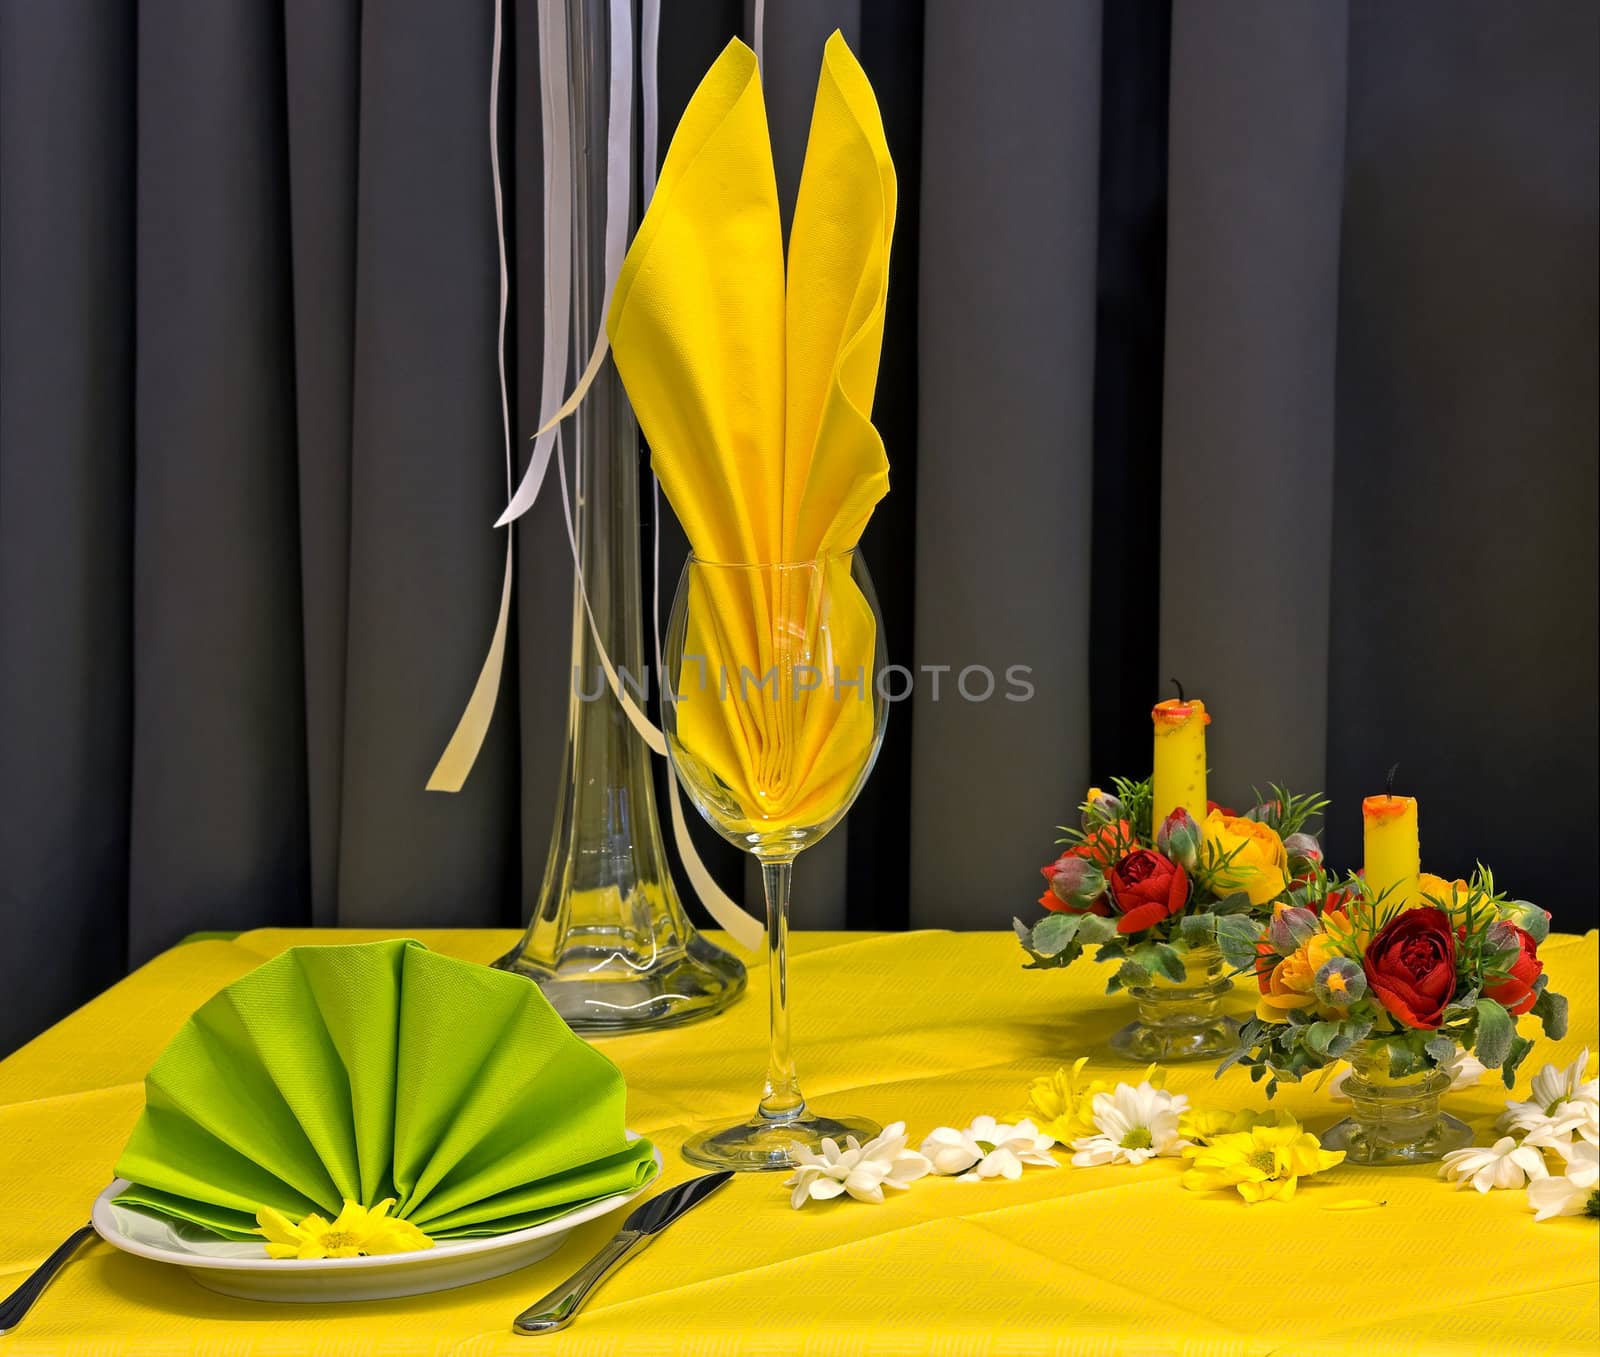 Decoration by fotoedgaras